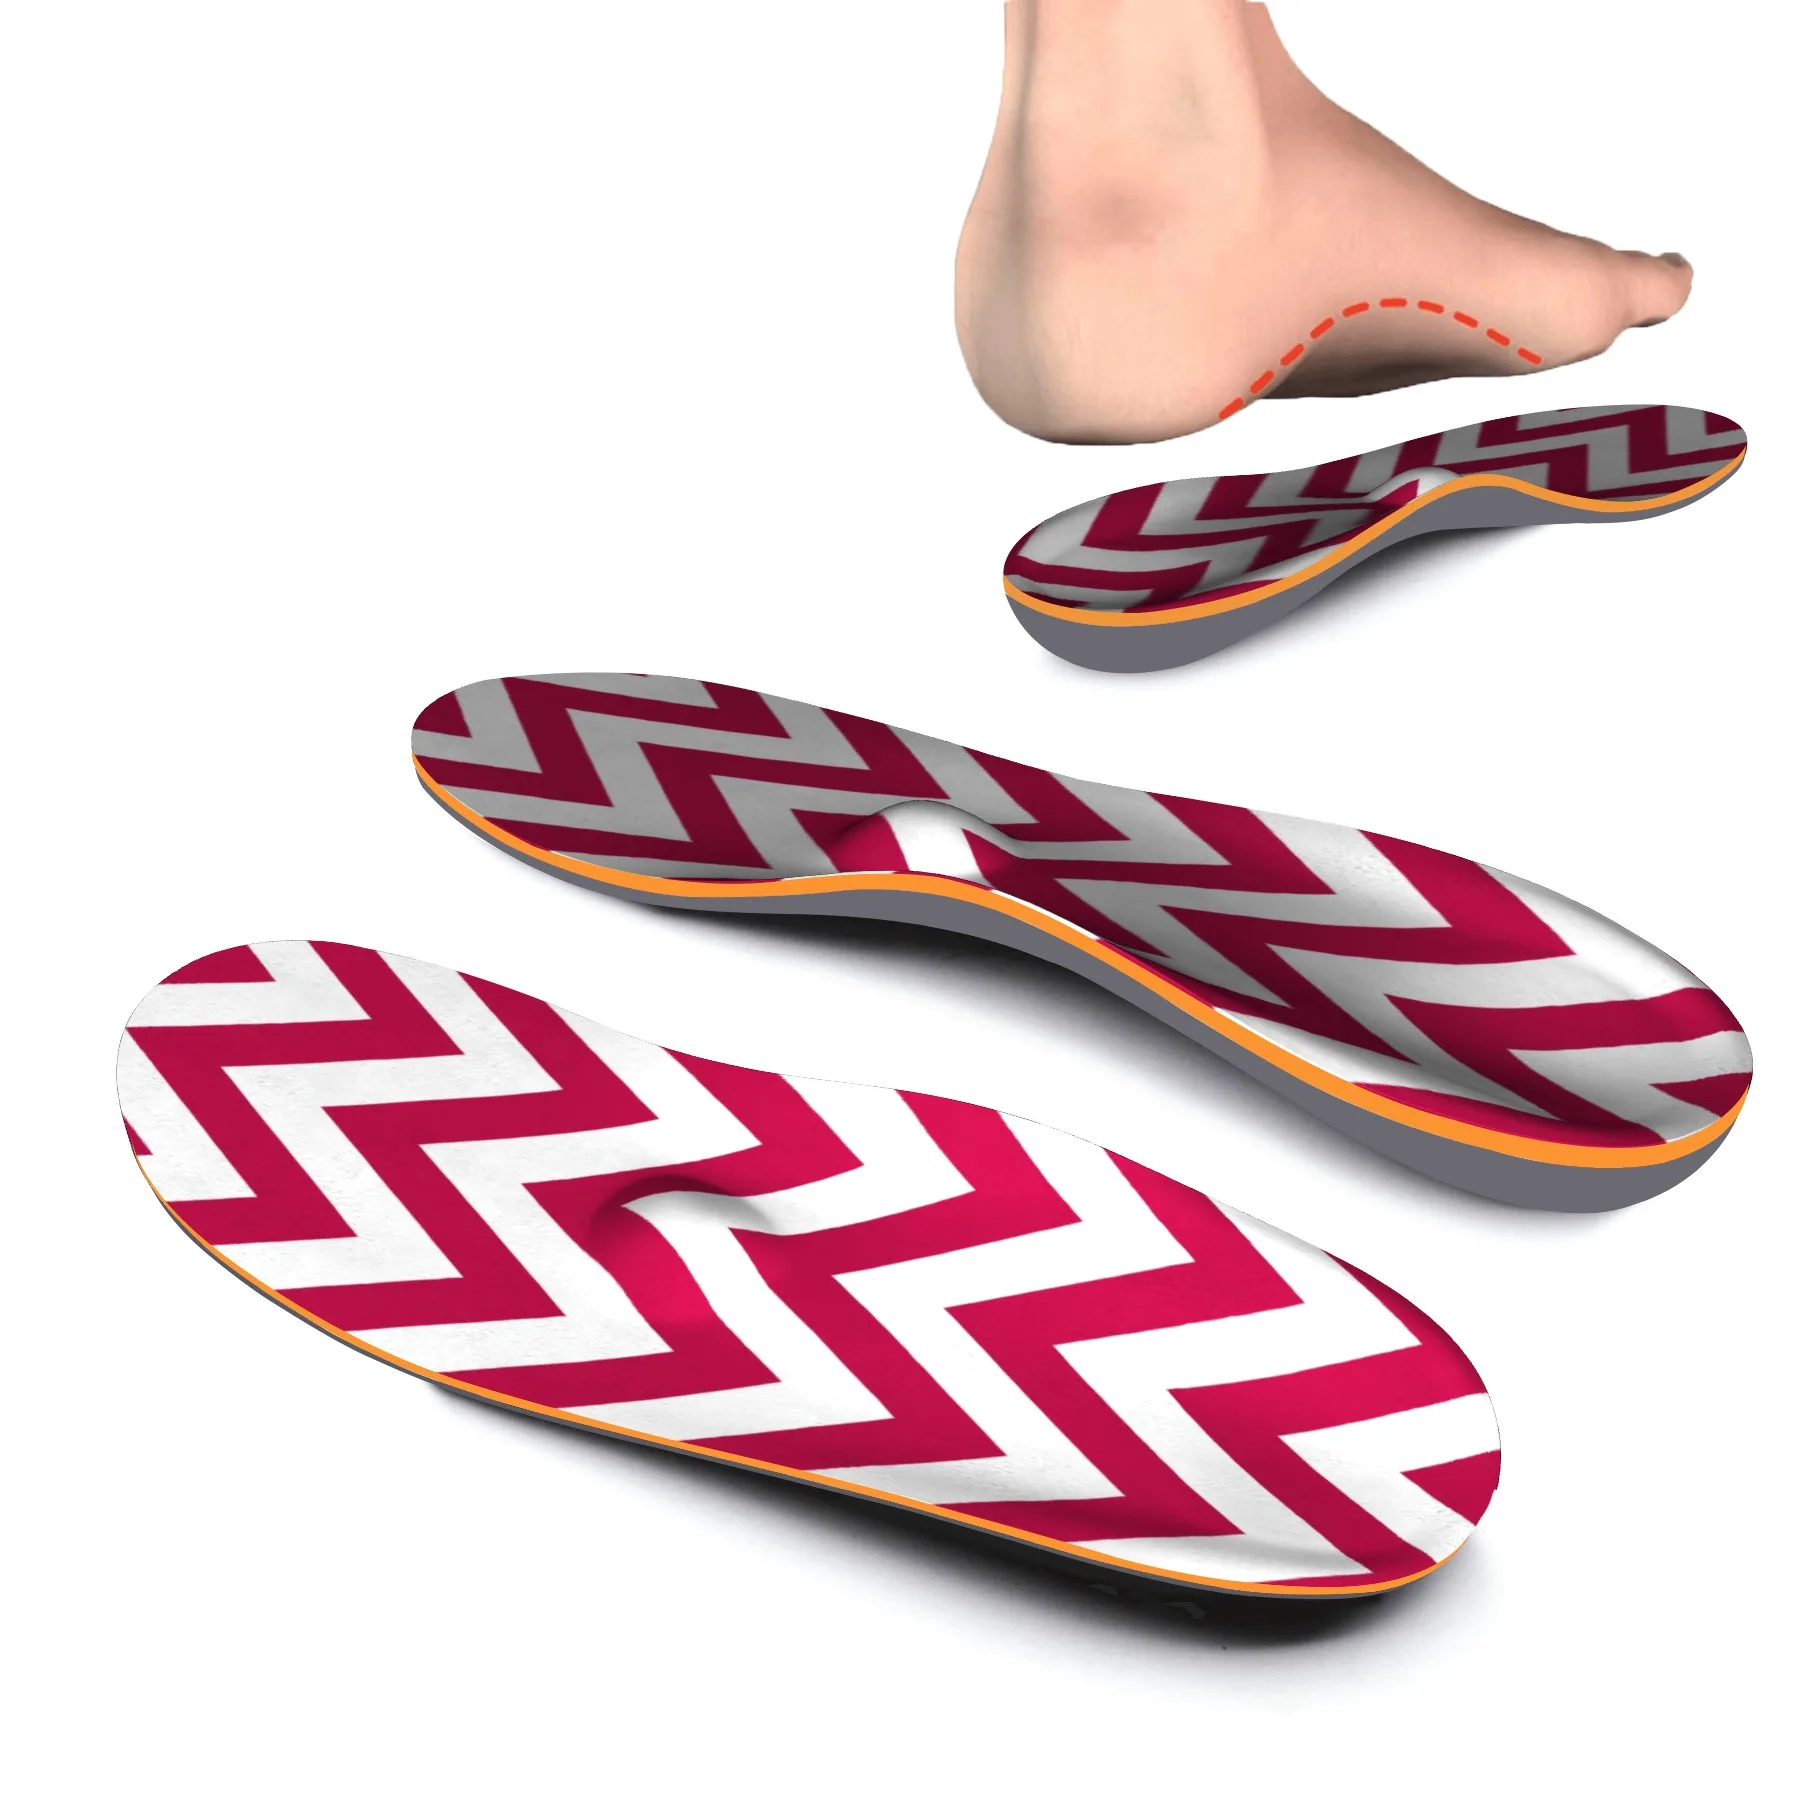 iFitna Full Length Red Striped Sport Orthotic Inserts with Arch Support-Best Insoles for Plantar Fasciitis,Flat Feet,Sore Foot